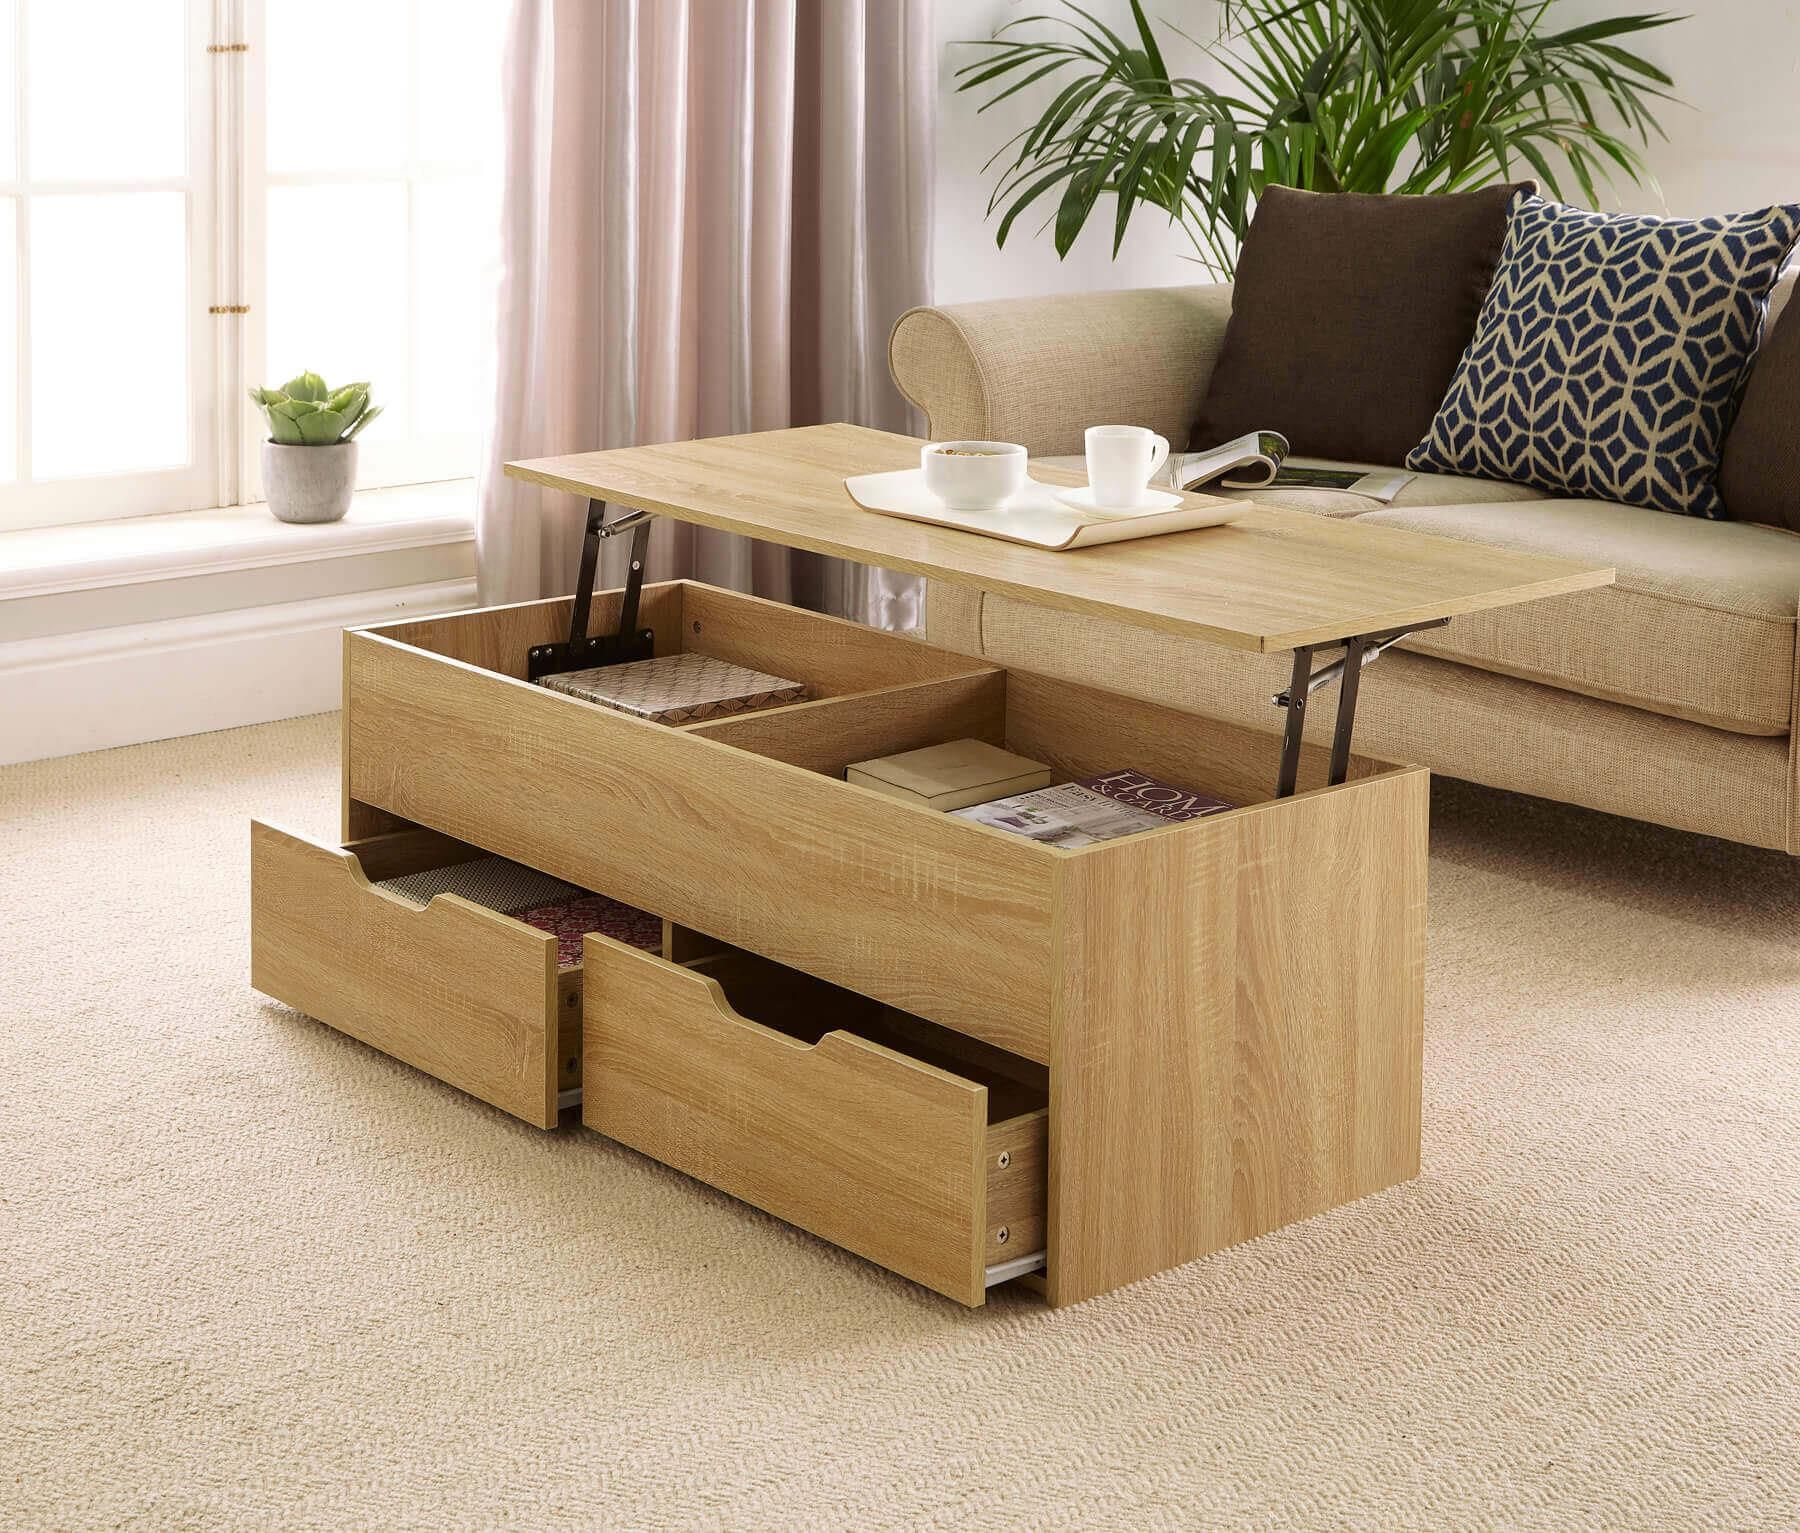 Oak Wooden Coffee Table With Lift Up Top And 2 Large Storage Drawers Inside Lift Top Coffee Tables With Storage Drawers (View 2 of 20)